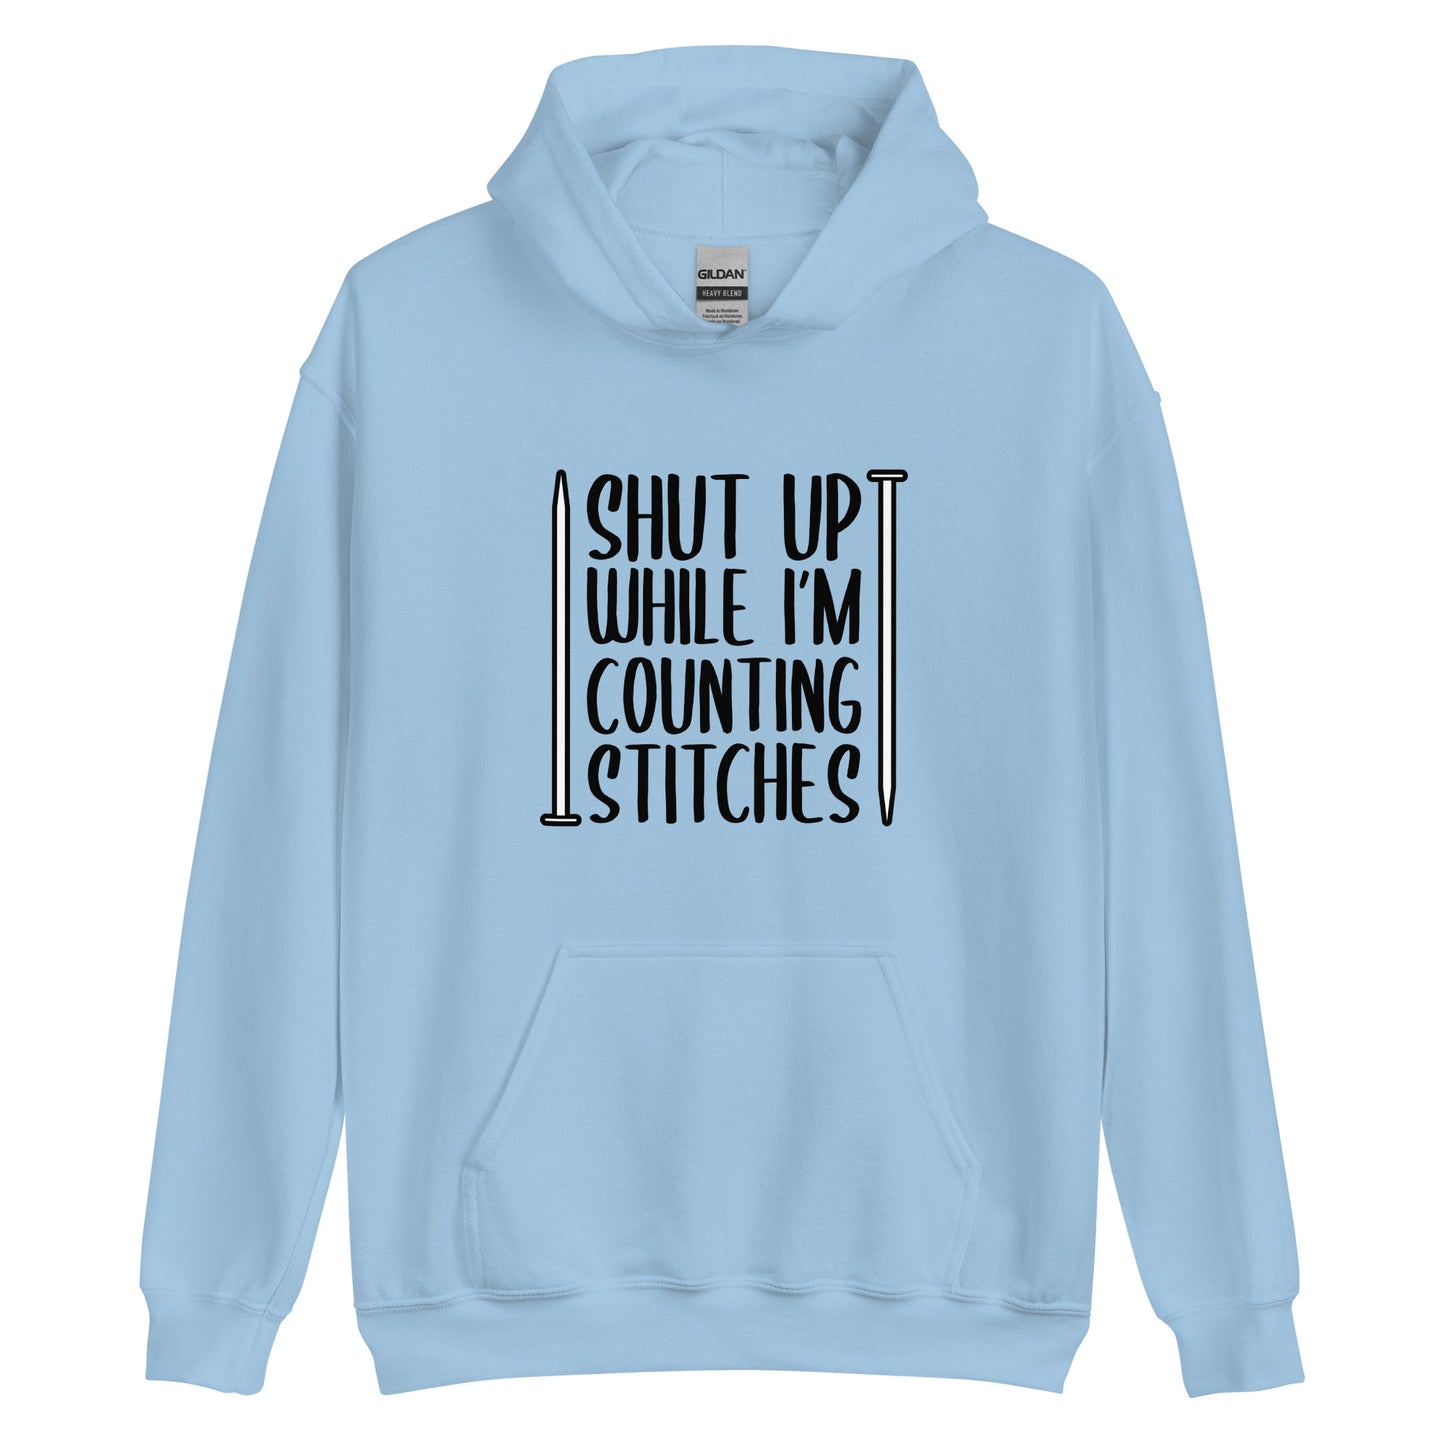 A light blue hooded sweatshirt with black text surrounded by two knitting needles. The text reads "Shut up while I'm counting stiches".